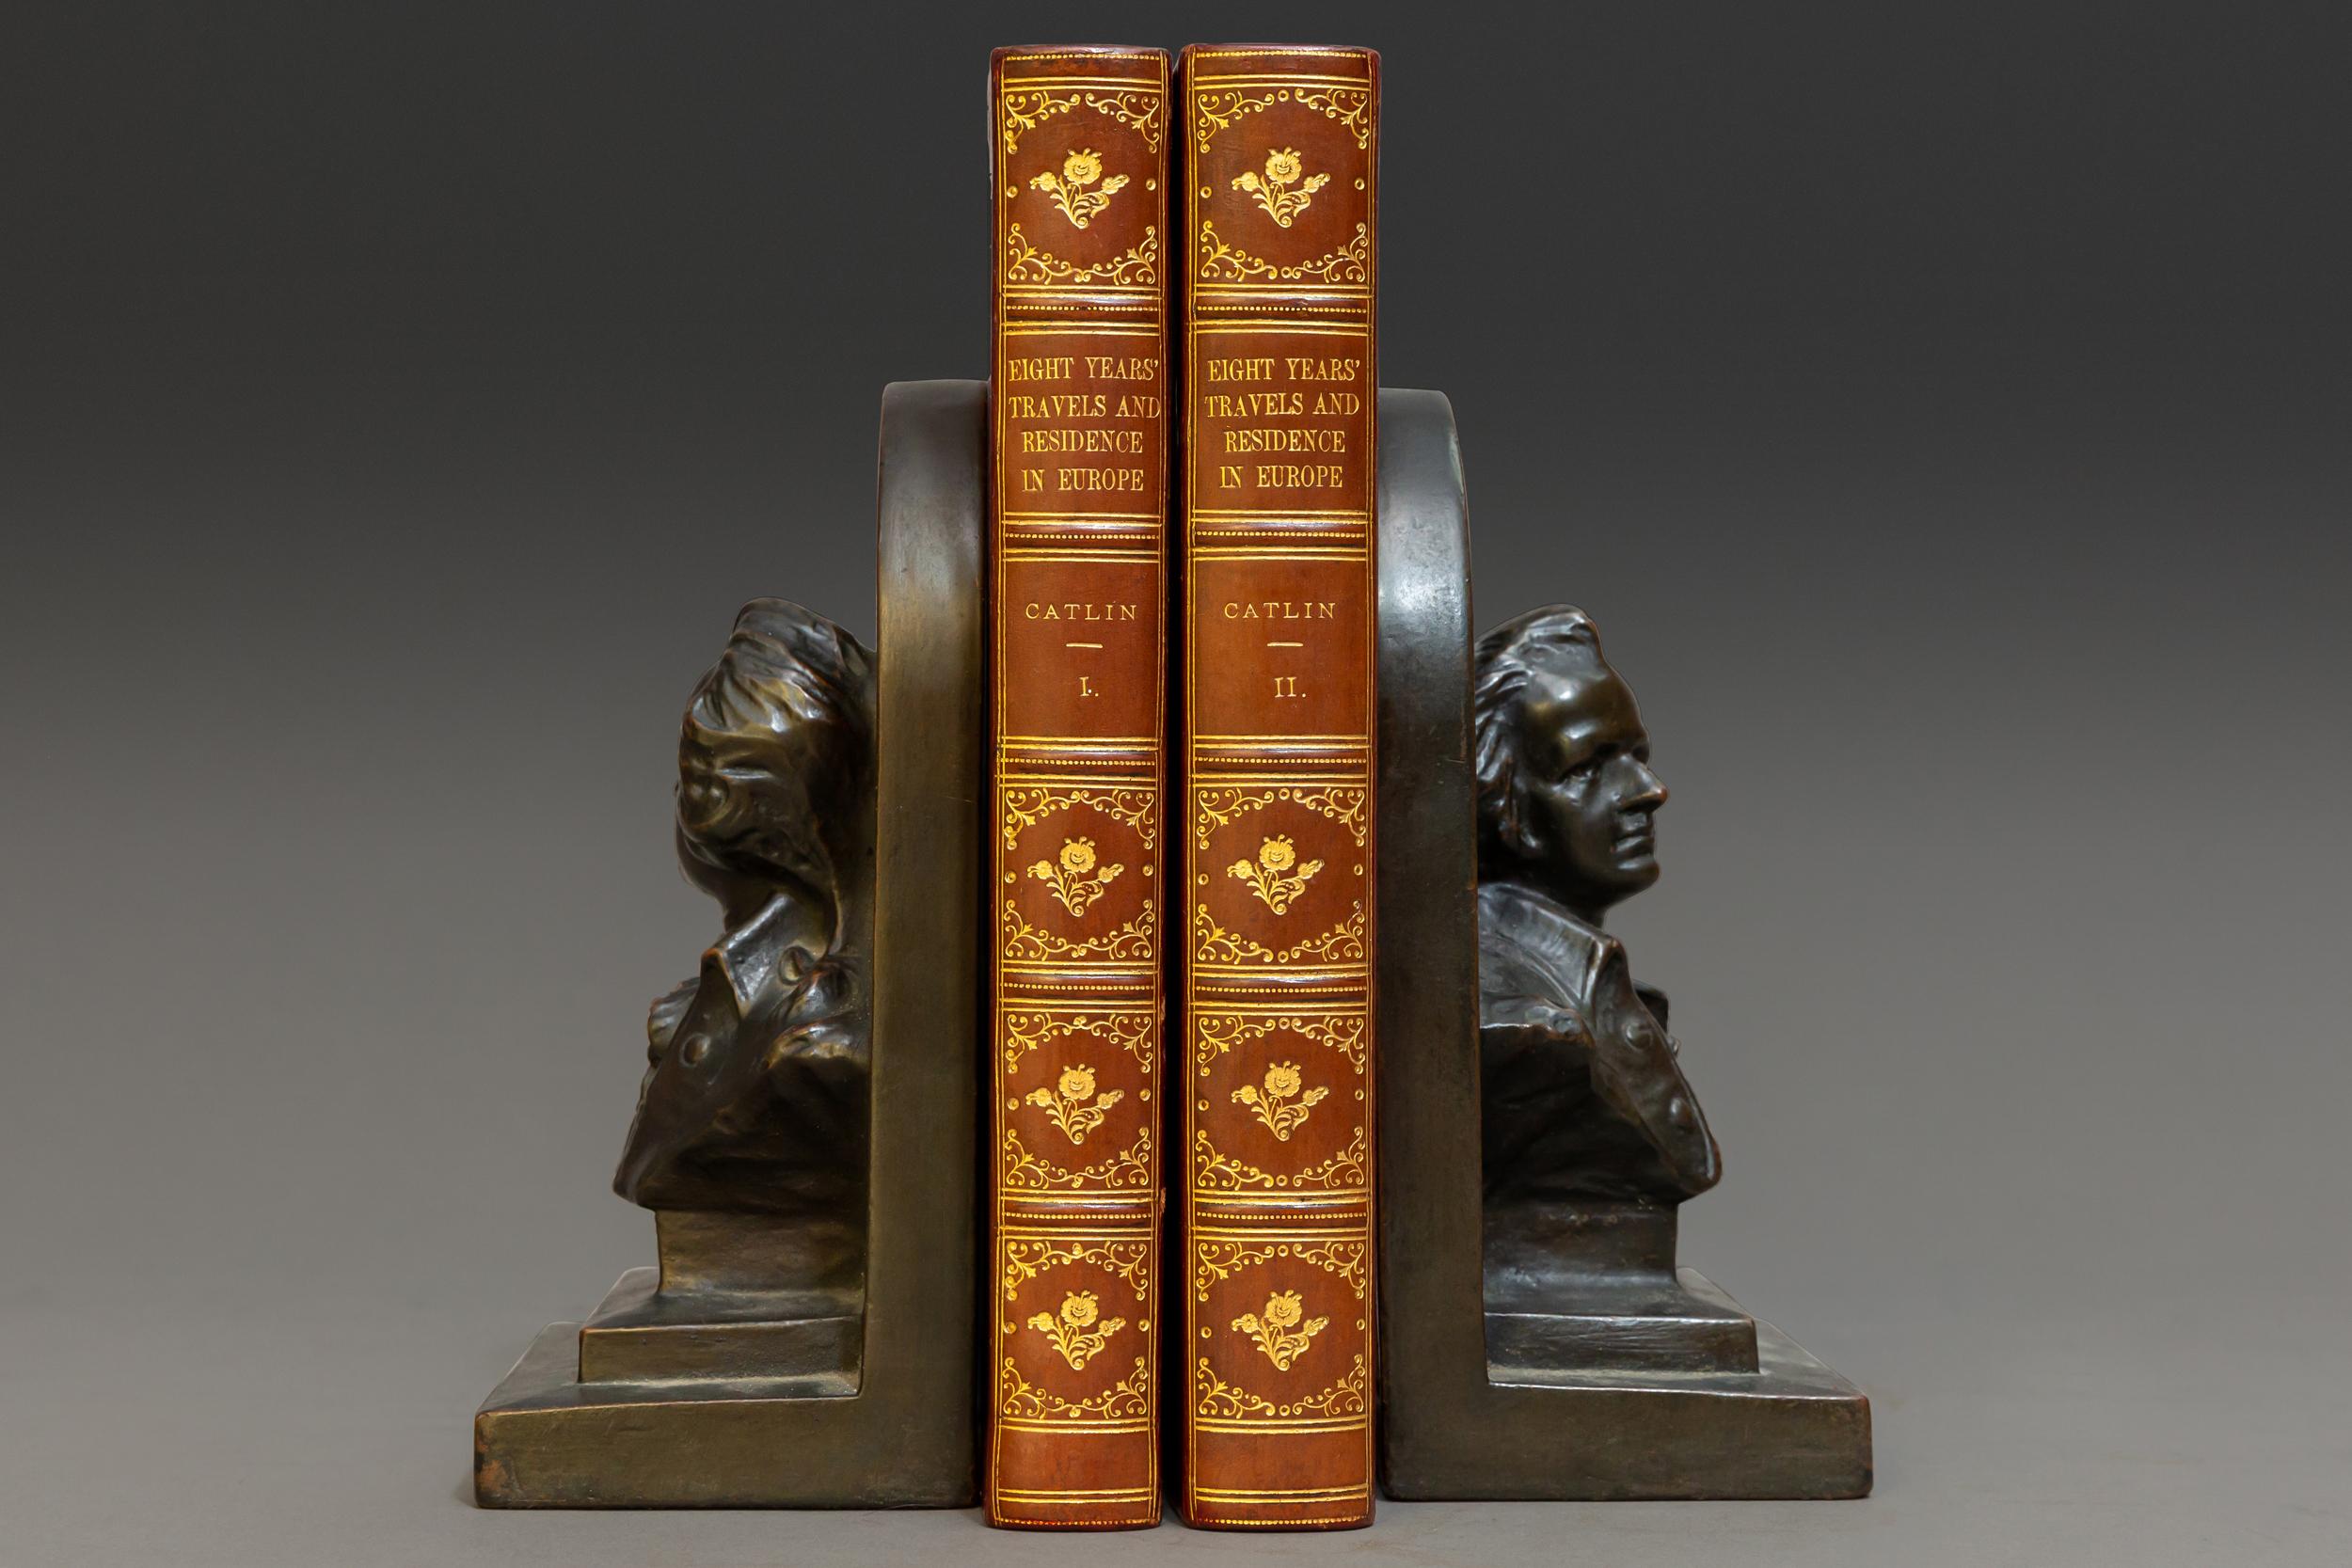 2 volumes. 

With numerous illustrations. Bound in 3/4 Wine Calf, marbled boards, top edges gilt,
Raised bands, gilt panels.  

Published: London: By The Author 1848

First Edition. 

Measures: H 8 1/2”, D 5 1/4”, W 1”.